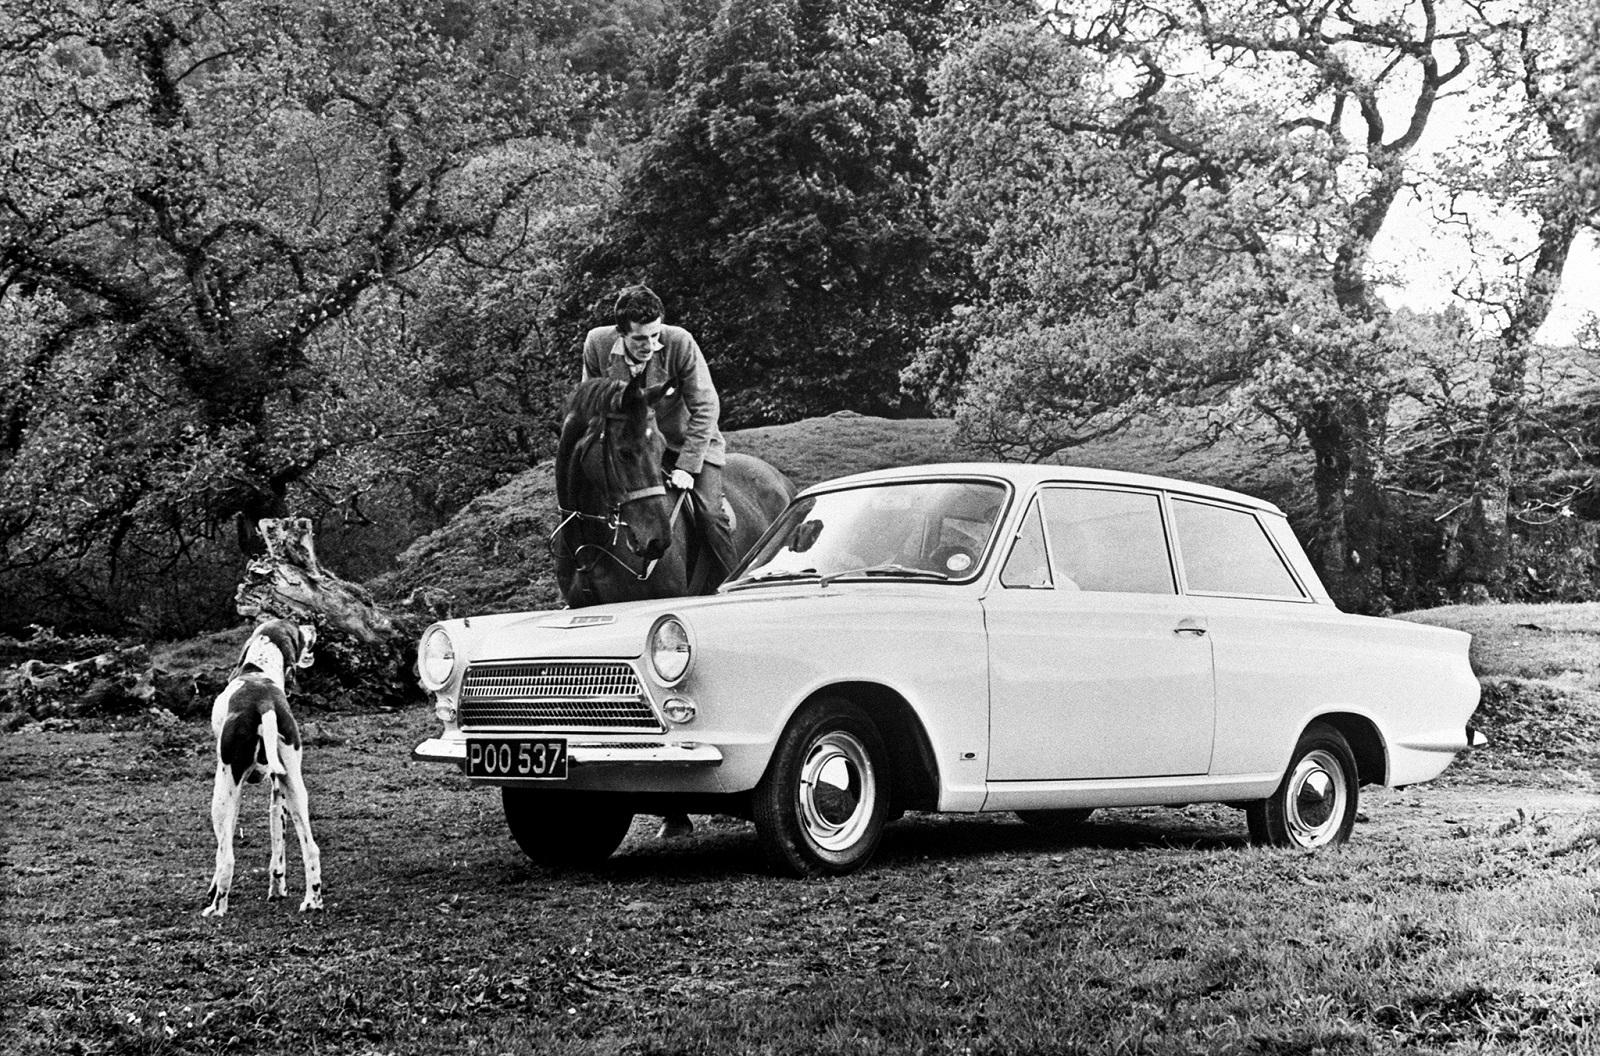 <p>Developed in the UK, the Cortina was the right car at the right time. It was released in <strong>1962</strong> with a spacious interior, an elegant design, and a variety of available four-cylinder engines. While enthusiasts primarily remember the <strong>Lotus</strong>-tuned model, the run-of-the-mill saloon and estate variants were even more important because they were permanent fixtures on the United Kingdom’s best-sellers chart.</p><p><strong>116,637 units</strong> of the Cortina were sold in <strong>1965</strong>, placing it in second place behind the Austin/Morris 1100. It notably finished ahead of the Mini by about 12,000 sales, and far ahead of the smaller Anglia. For context, the best-selling car in the United Kingdom in 2019 (2020’s numbers were skewed by the pandemic) was the Fiesta, with <strong>77,833 units</strong>. The Mondeo wasn’t in the top 10.</p>